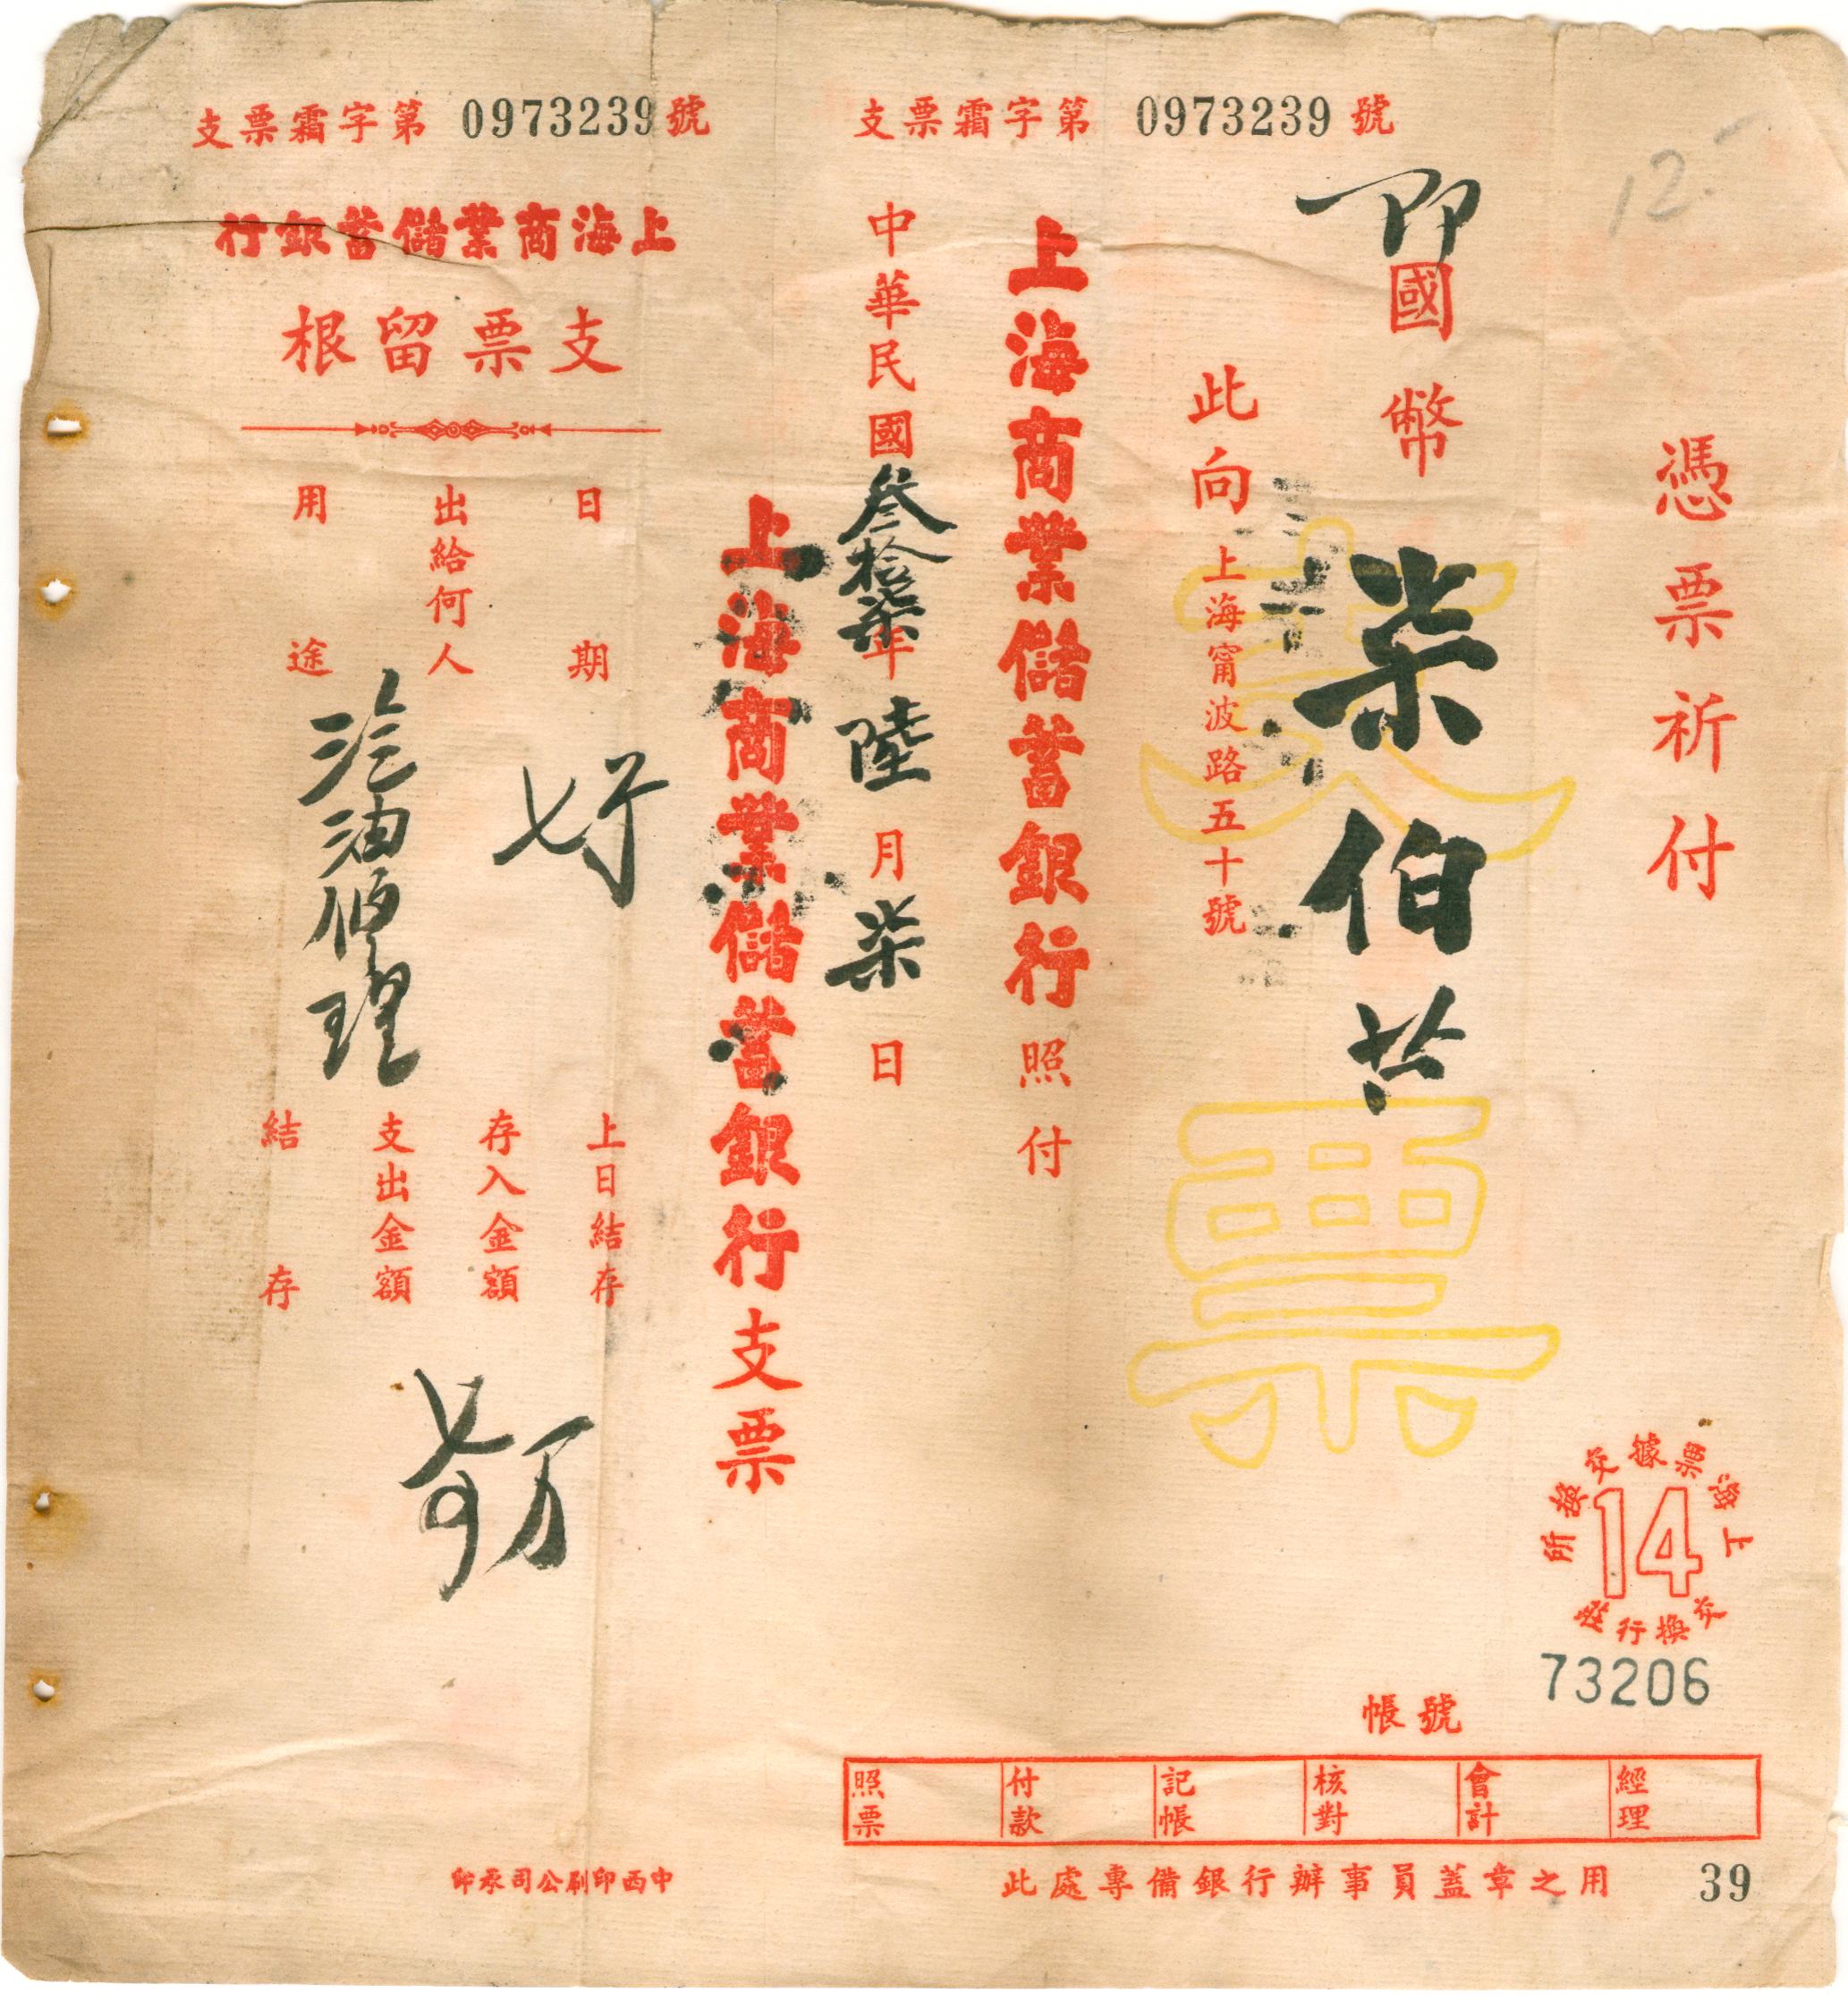 D1300, Check of Shanghai Commercial and Saving Bank, Cheque, 1948